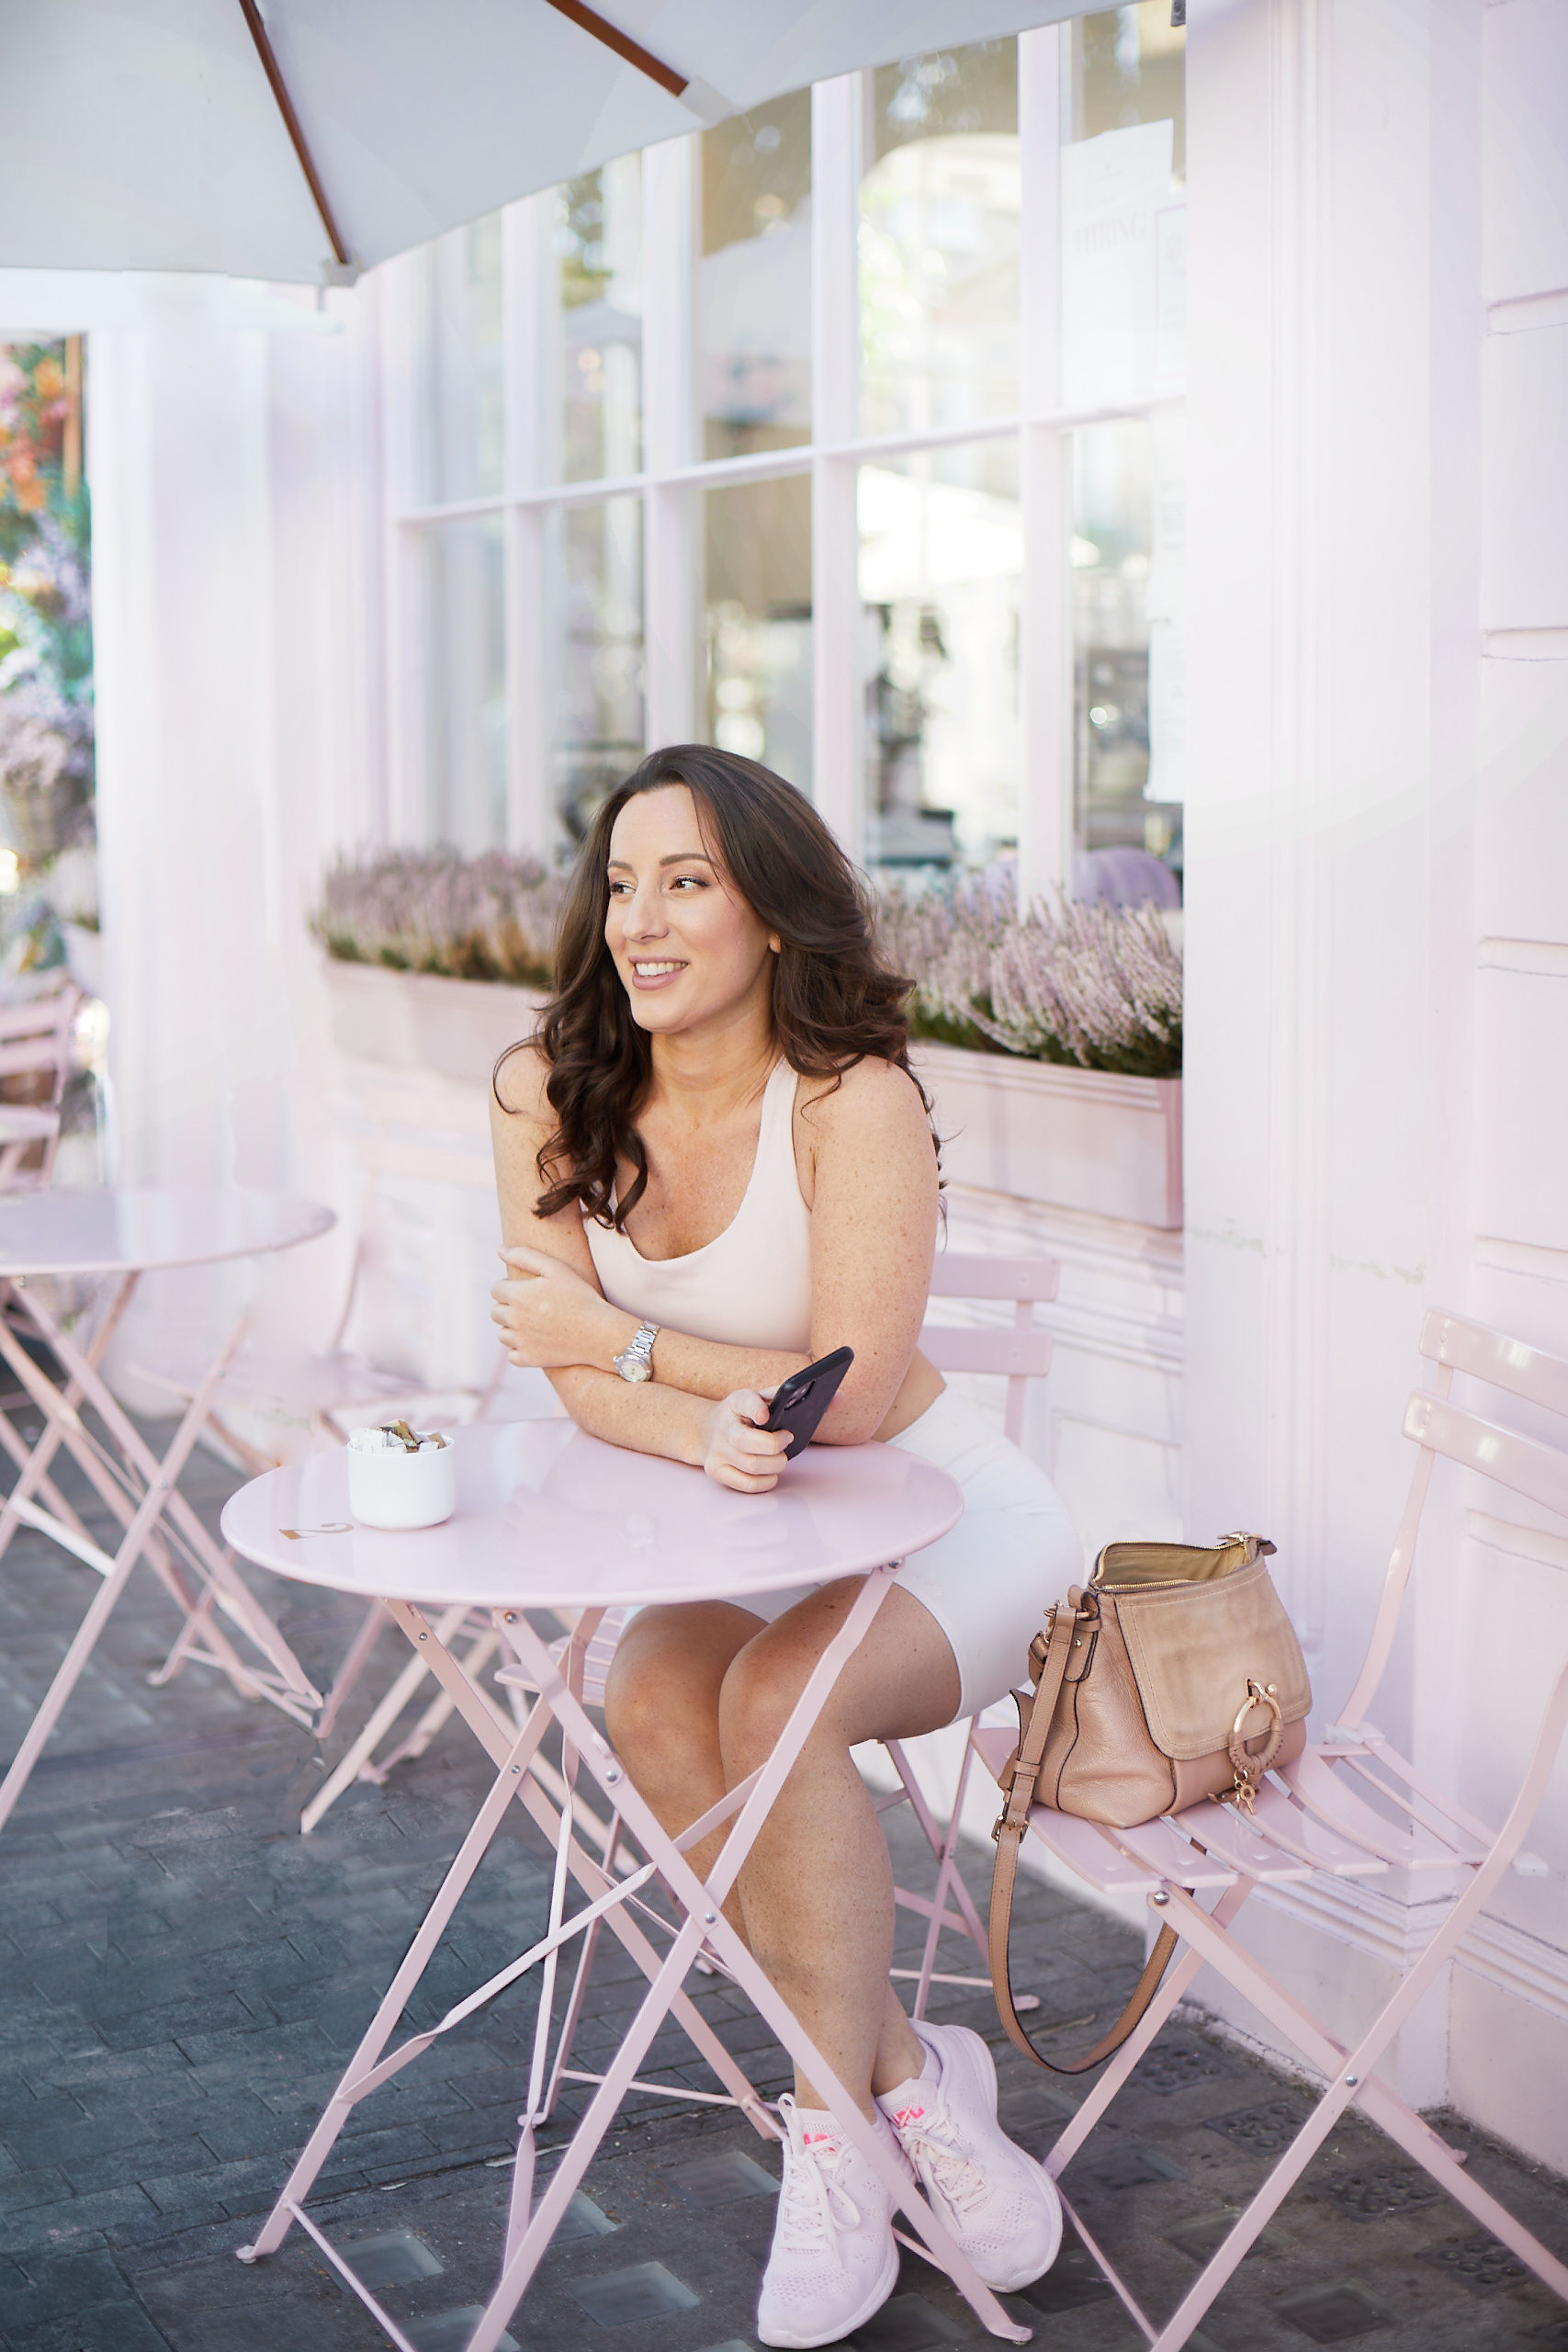 Brunette wearing fitness clothes sitting in pink cafe holding phone